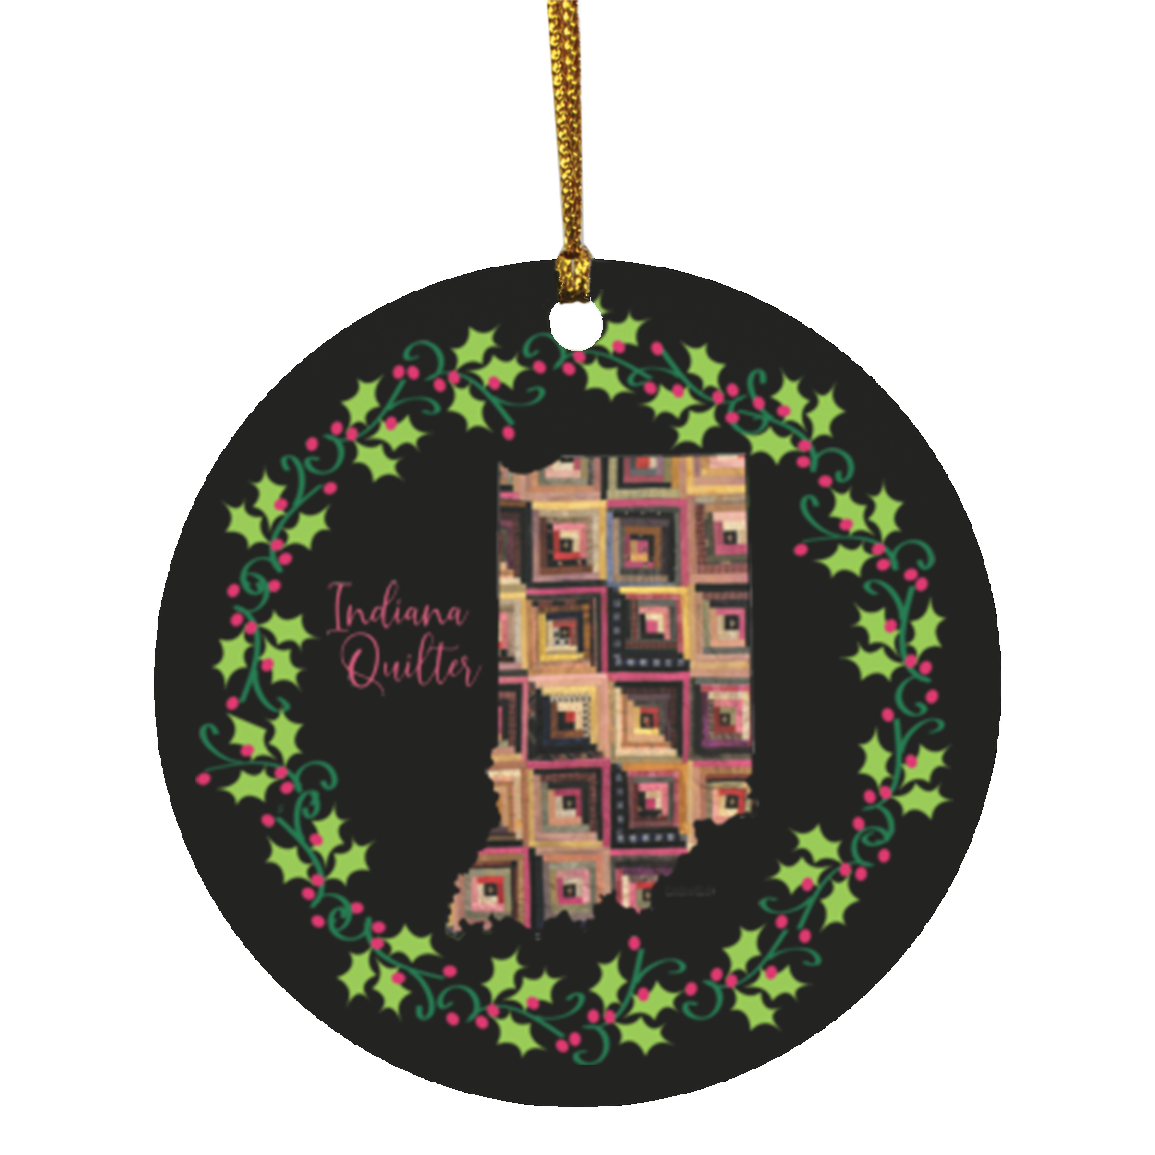 Indiana Quilter Christmas Circle Ornament